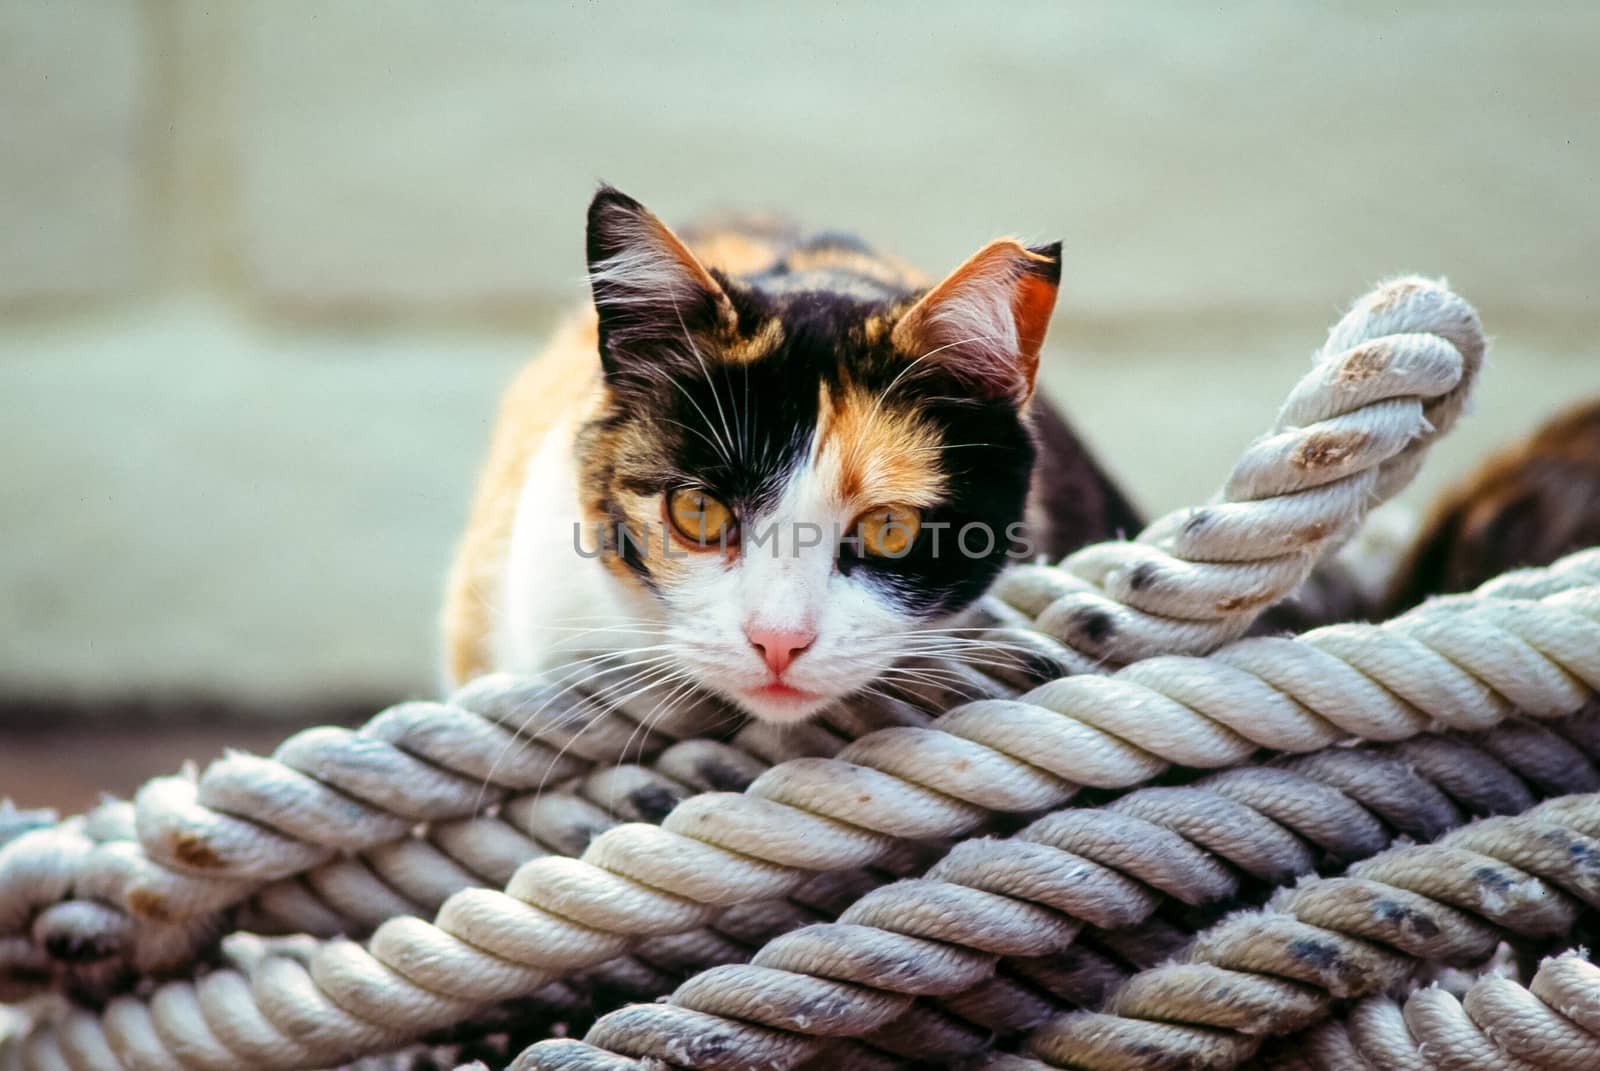 Boatyard cat resting on ropes. by Sprague